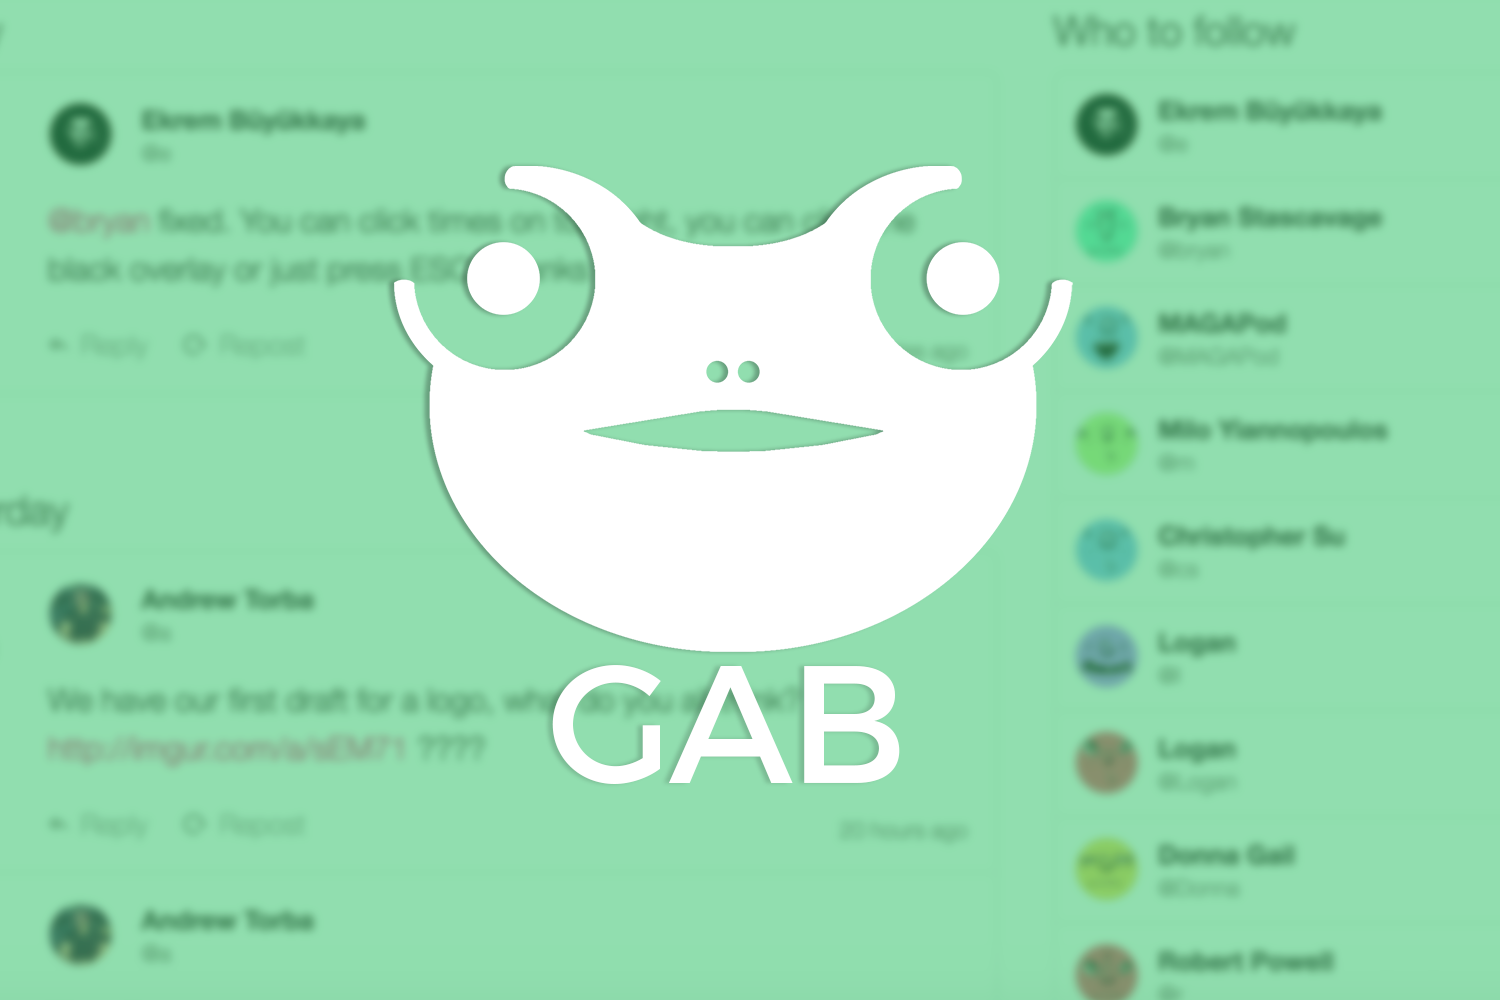 Parler-like site Gab was hacked, 70 GB of data is now in the hands of an activist group